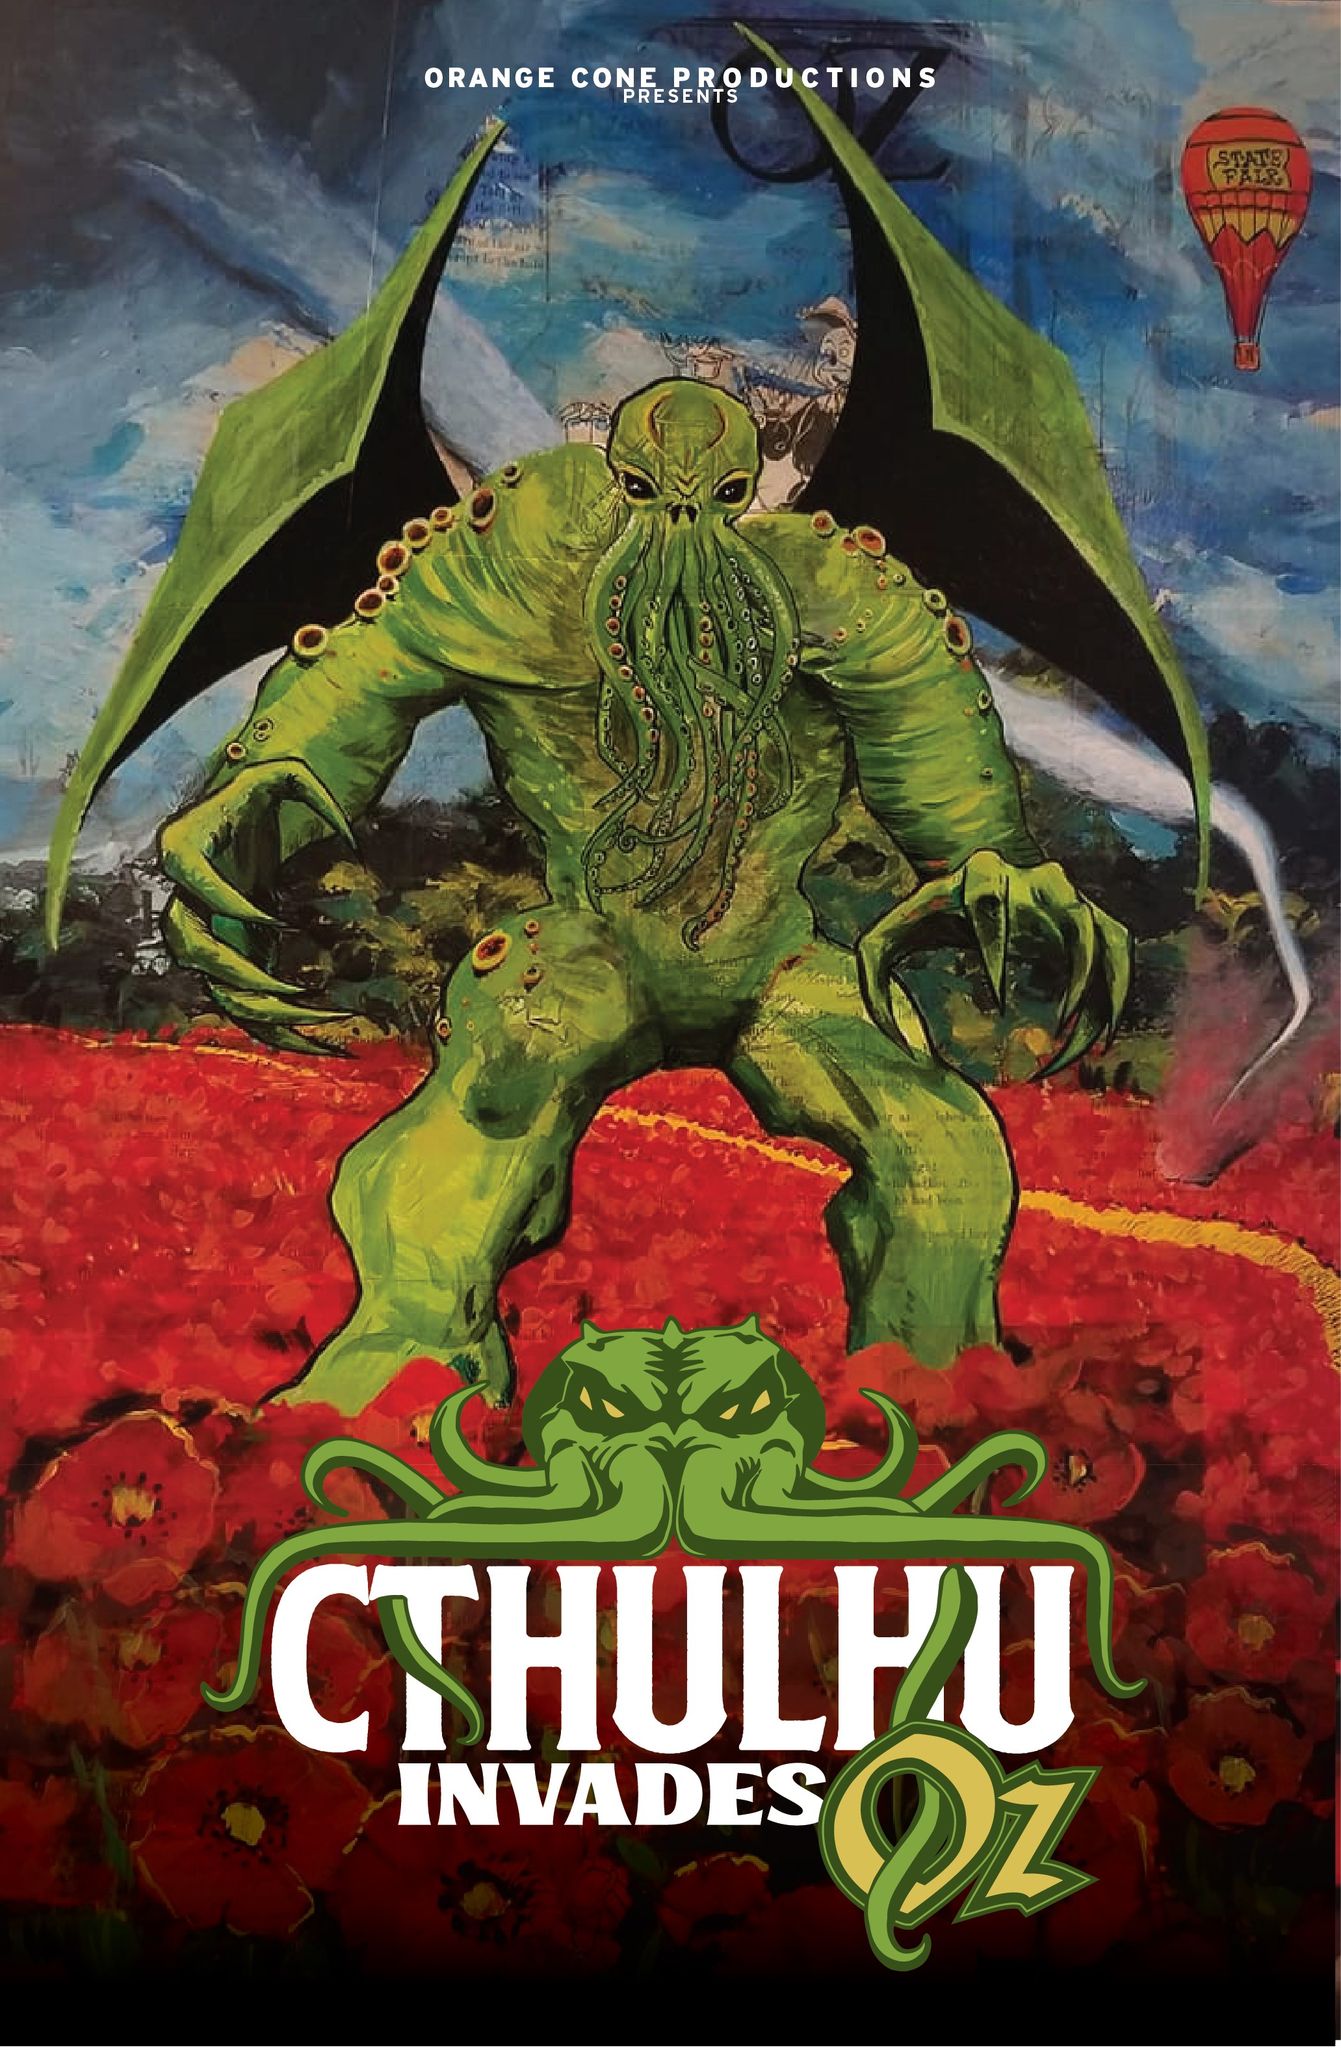 Cthulhu Invades Oz (Kyle Willis - Soft Cover)